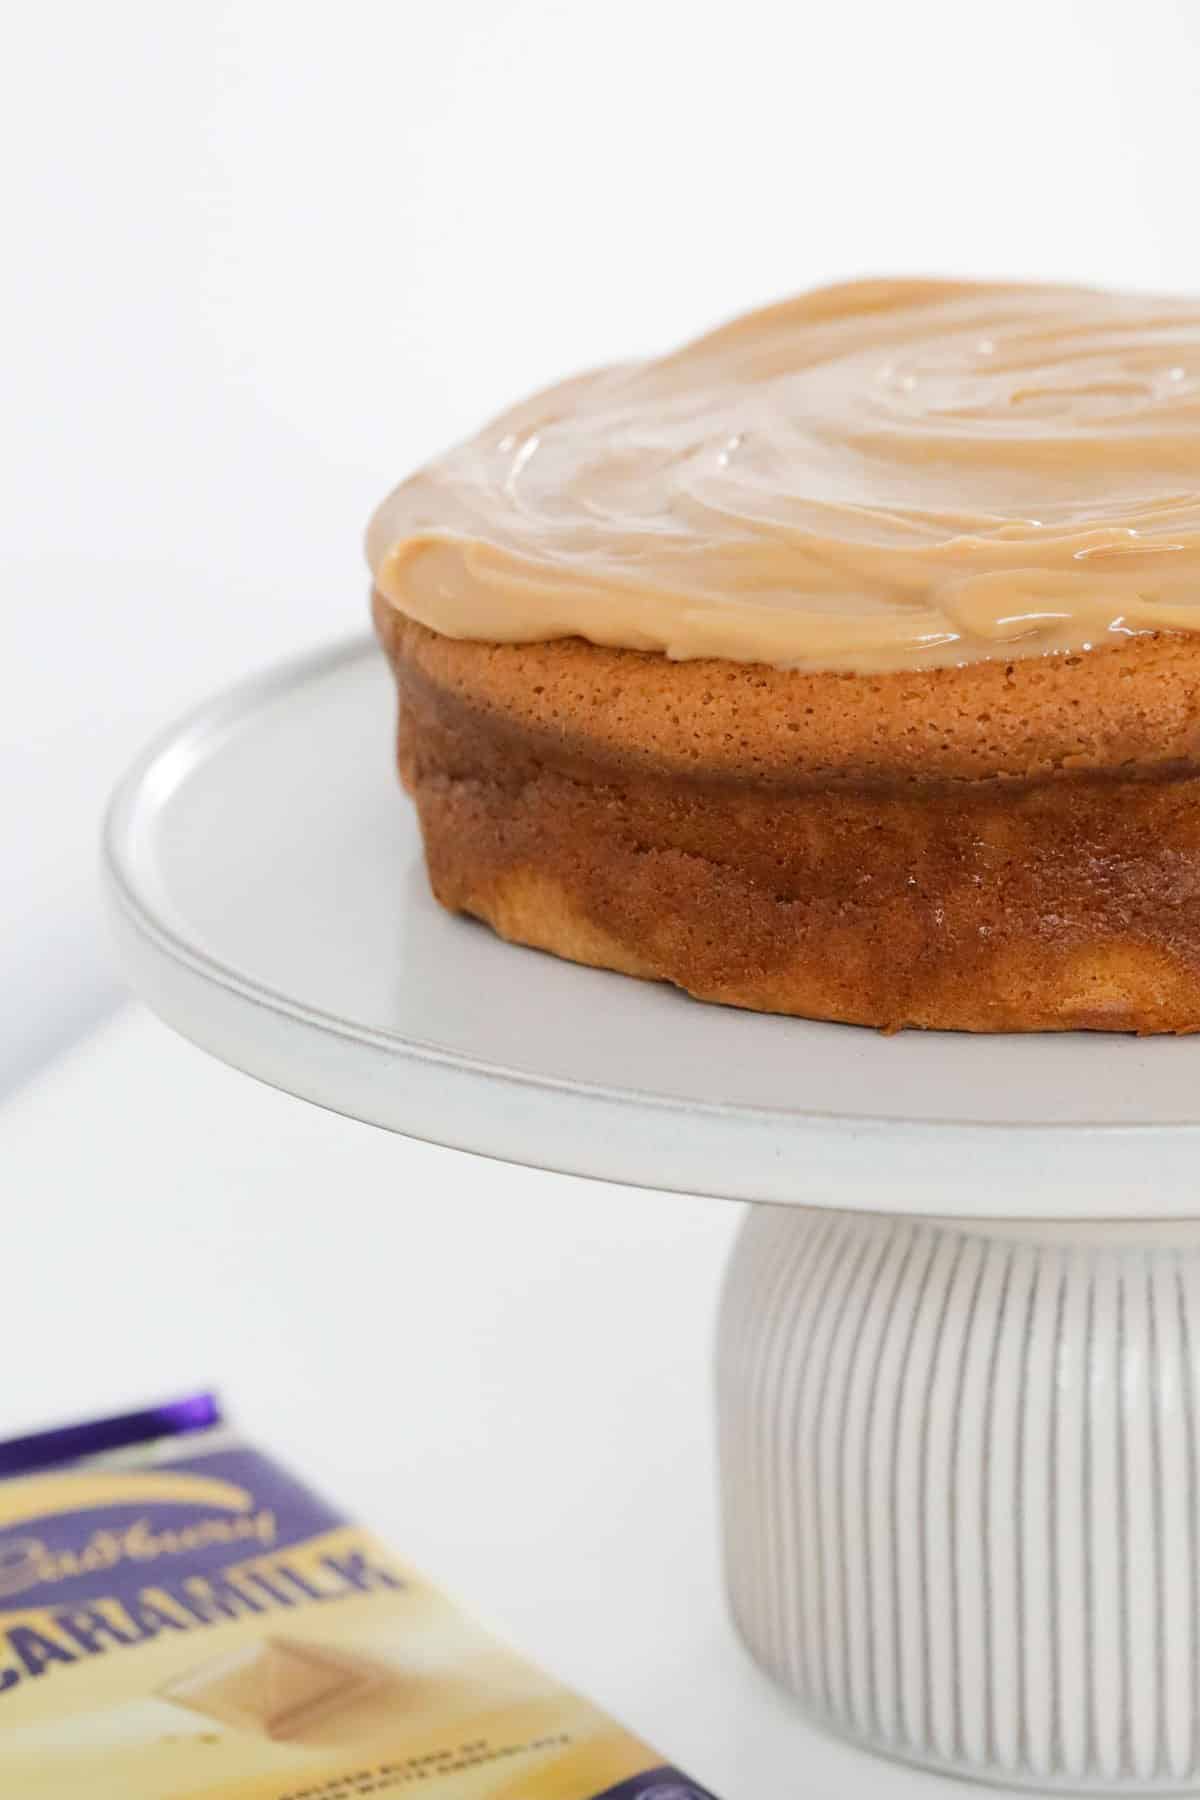 A caramel cake on a white cake stand.